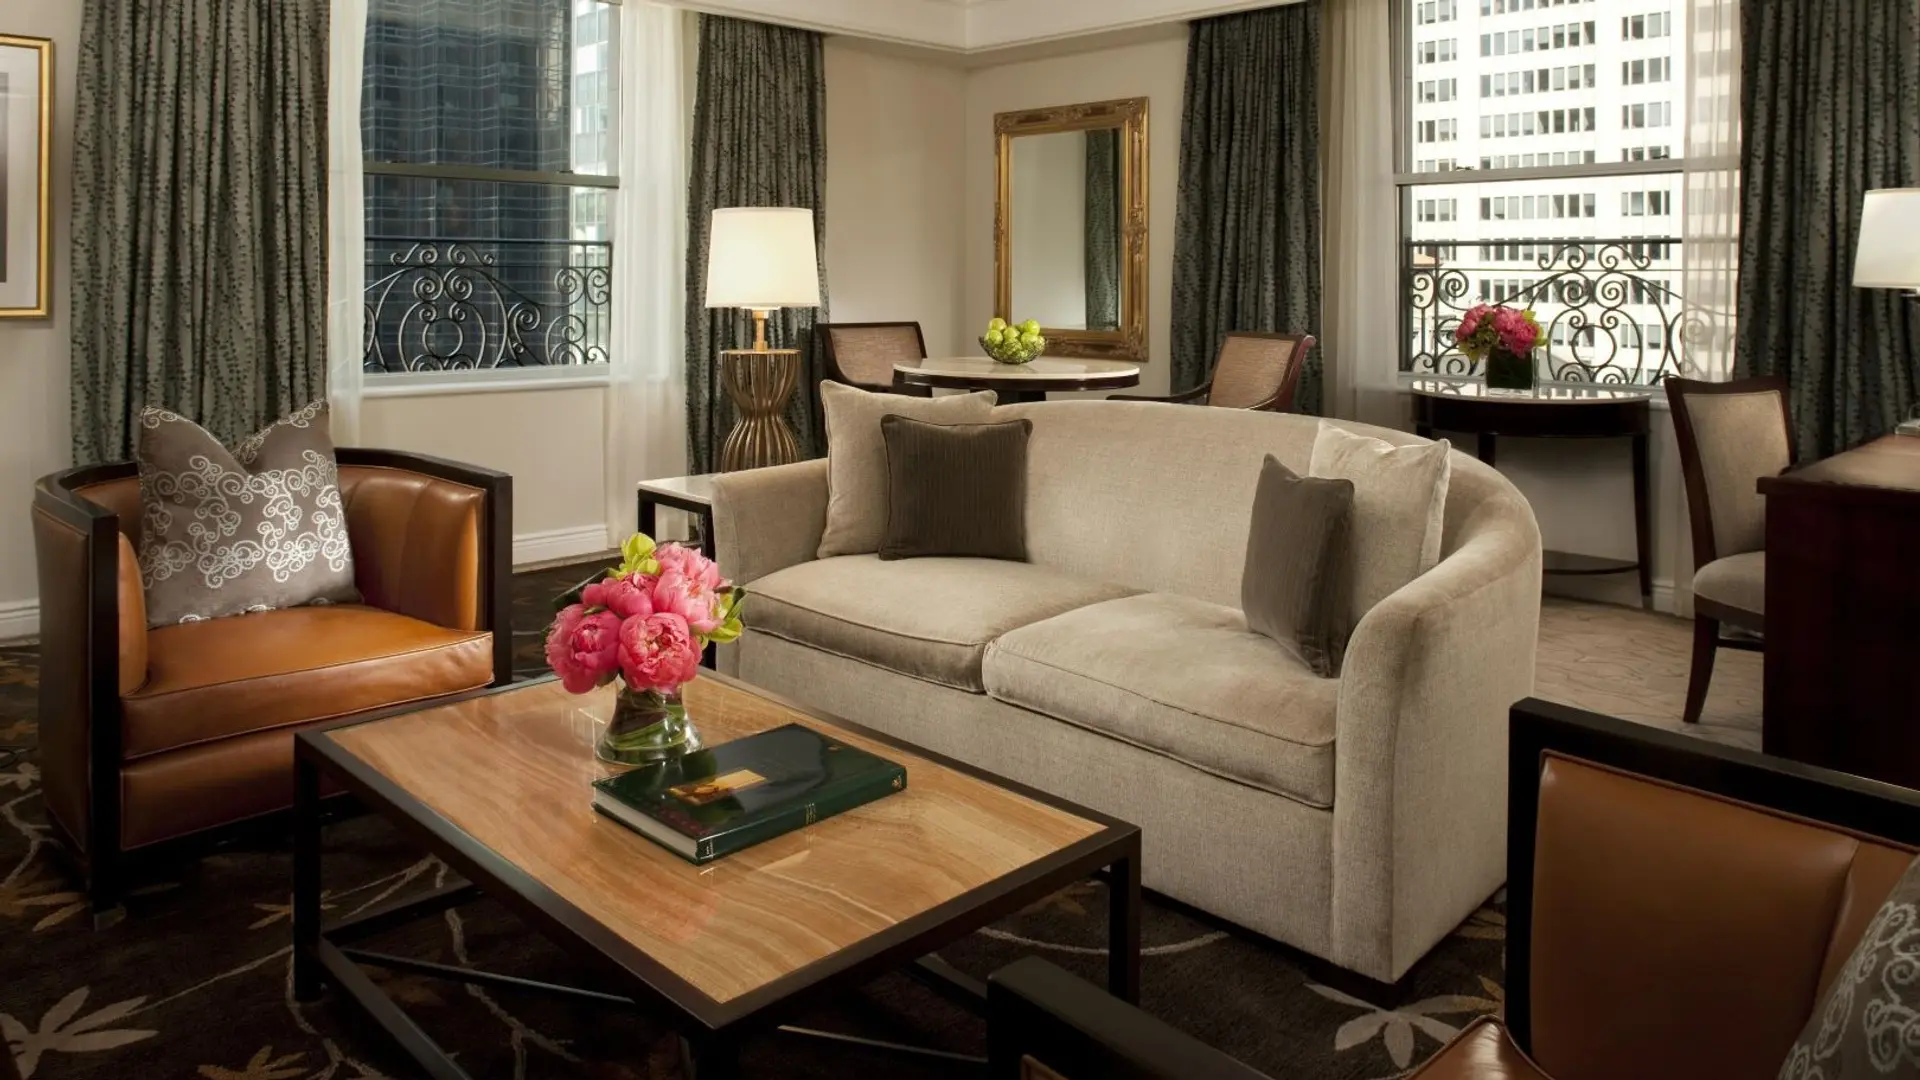 Hotel review Accommodation' - The Peninsula New York - 9